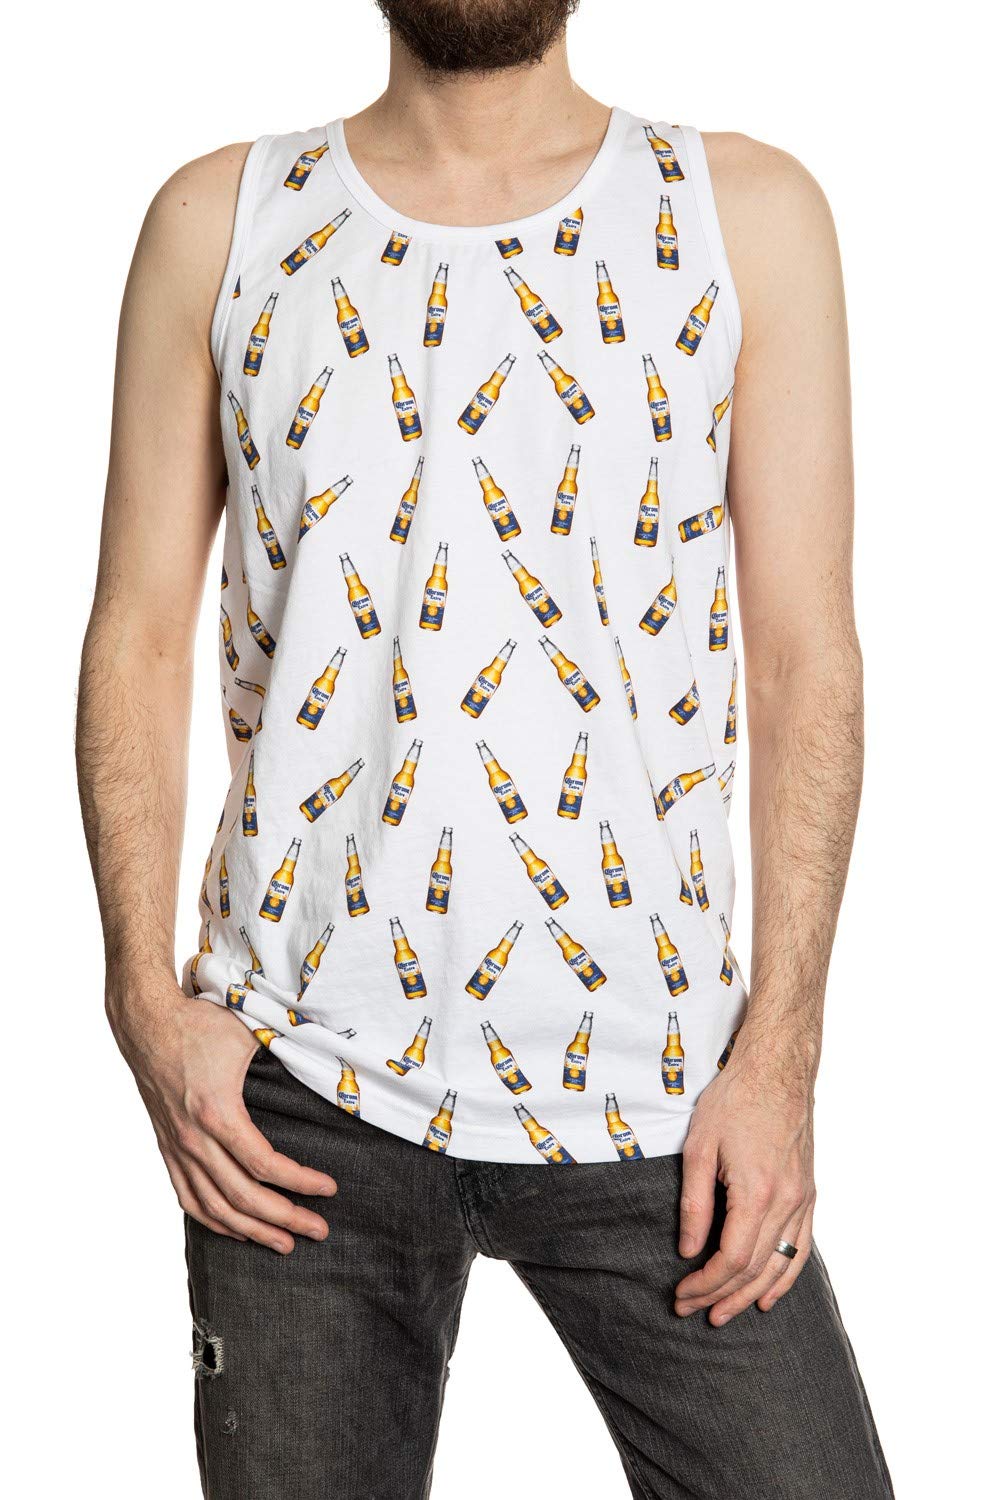 Corona Allover Bottle Print Tank Top Front View.